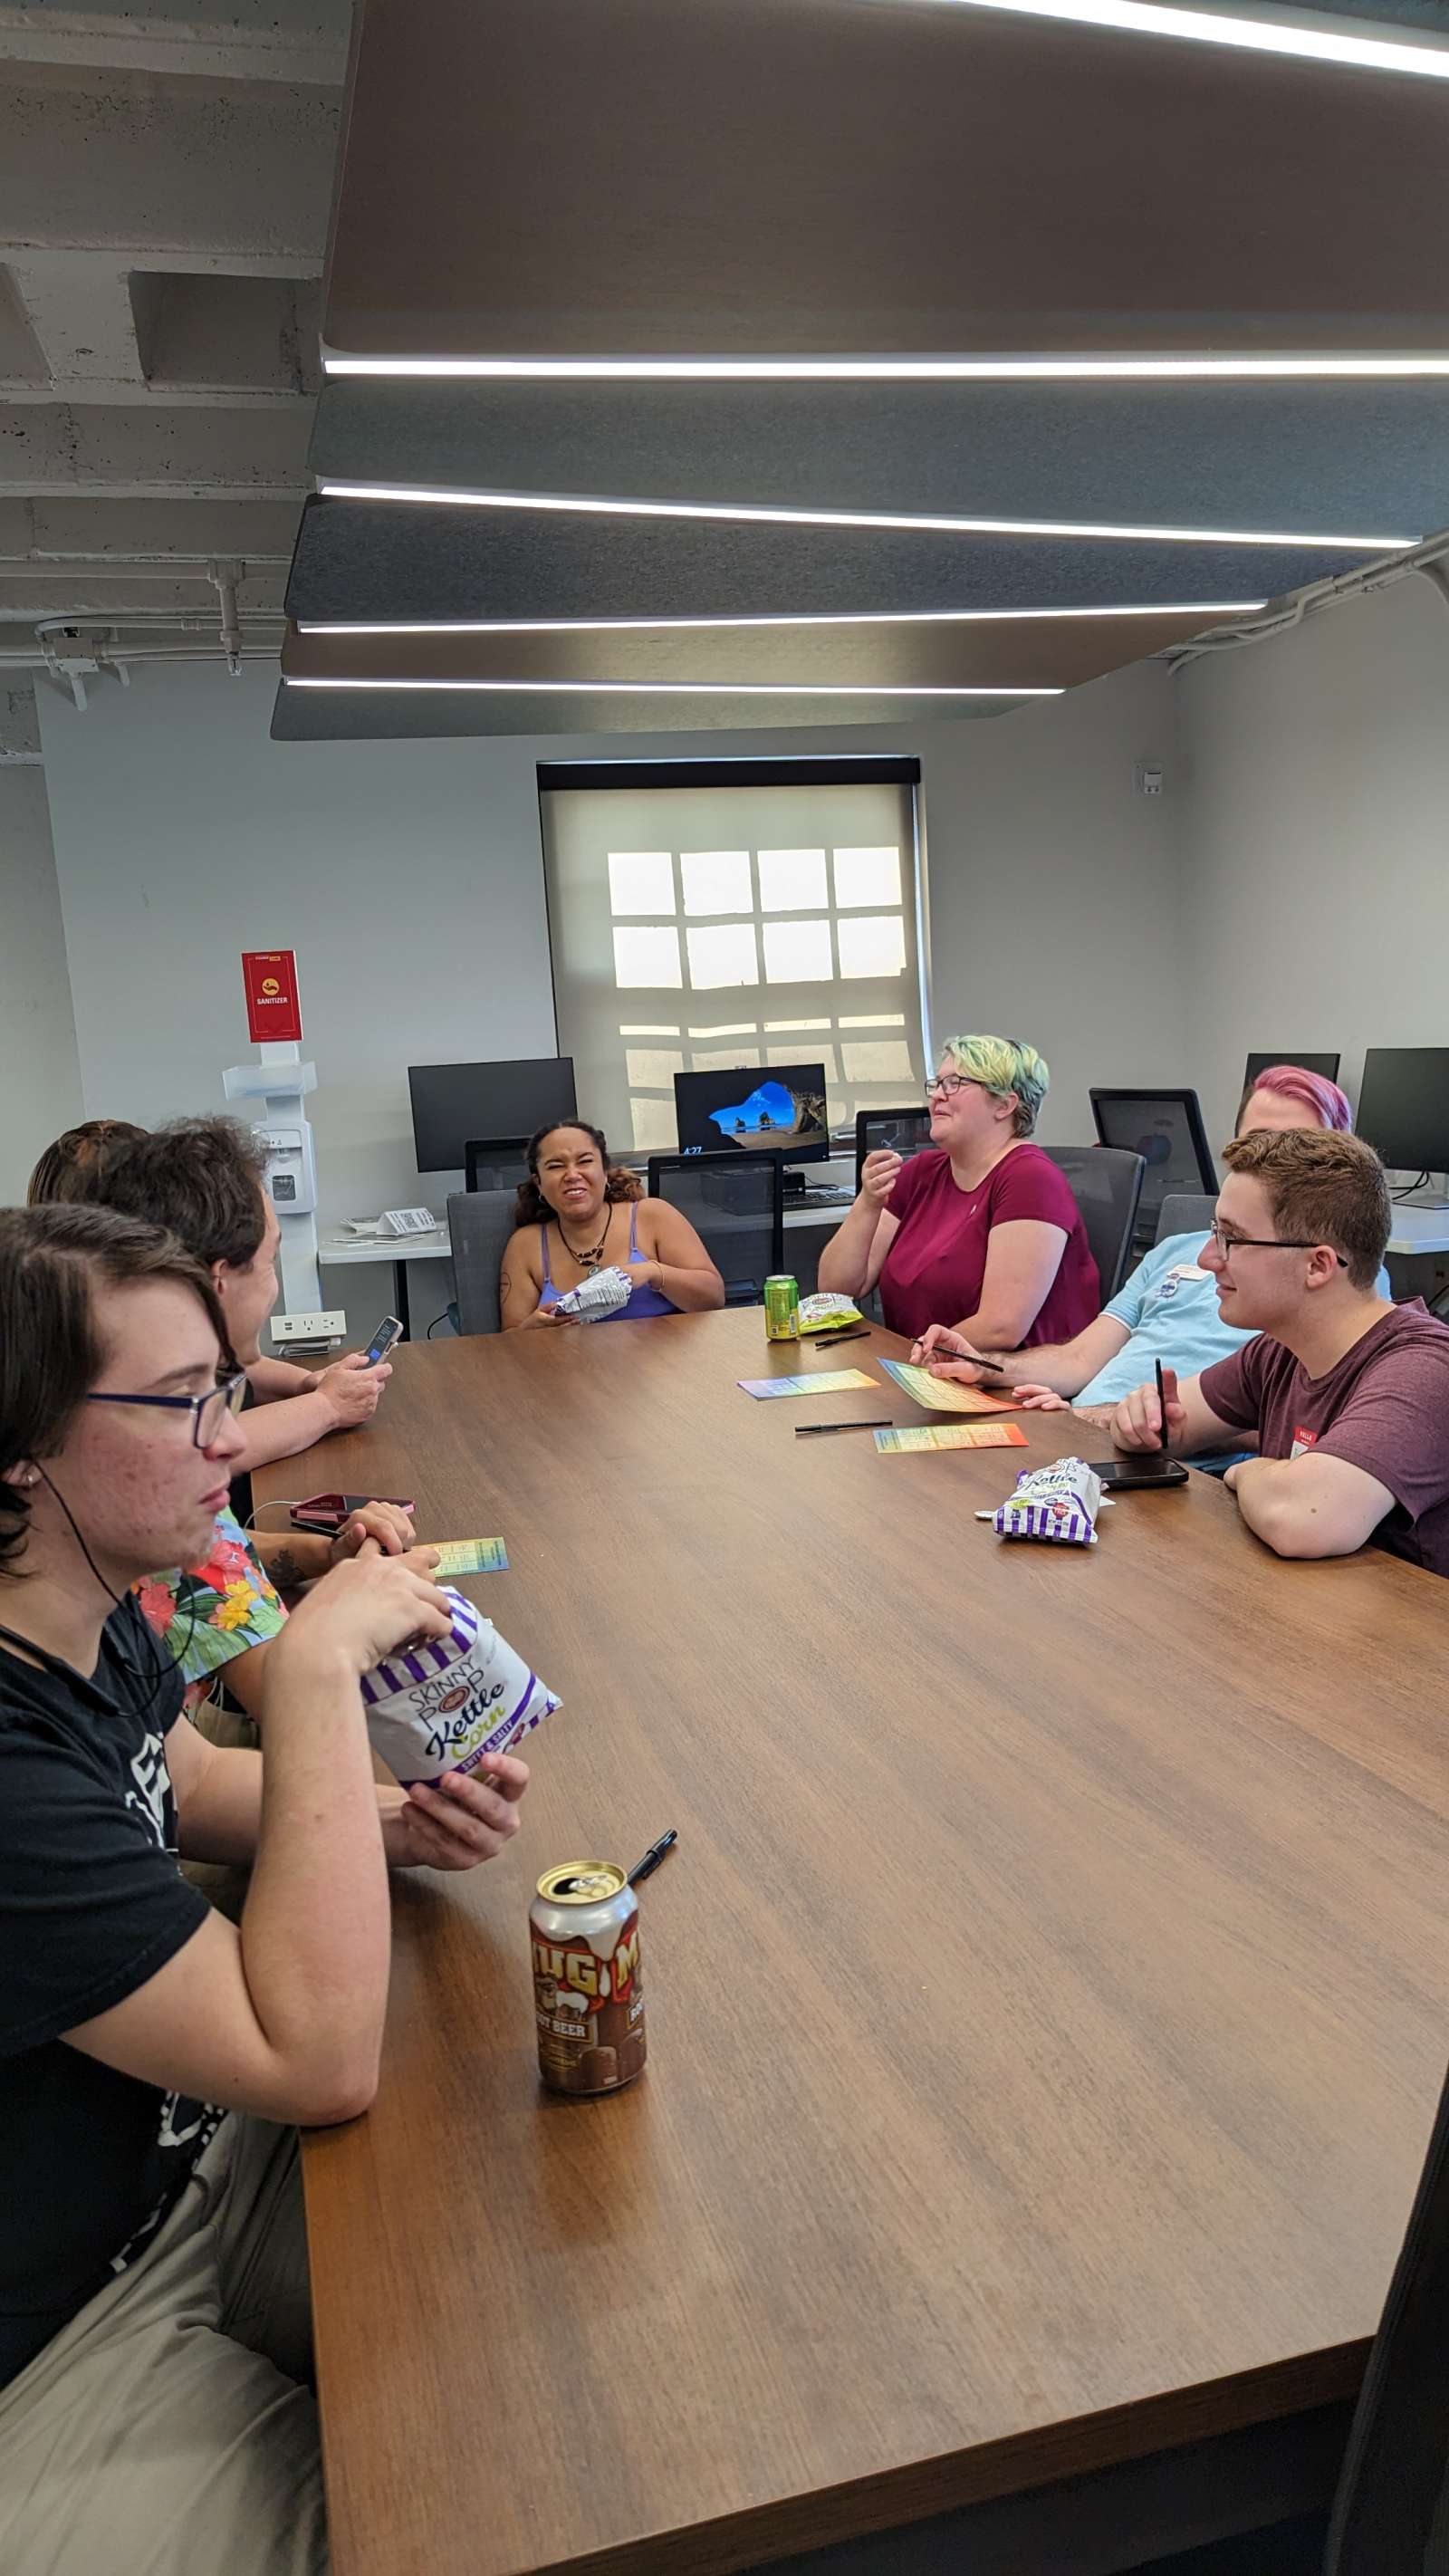 Students sitting around the large table at the Center for LGBTQIA+ Student Success. Many students conversing and laughing while eating snacks and playing Human Bingo.